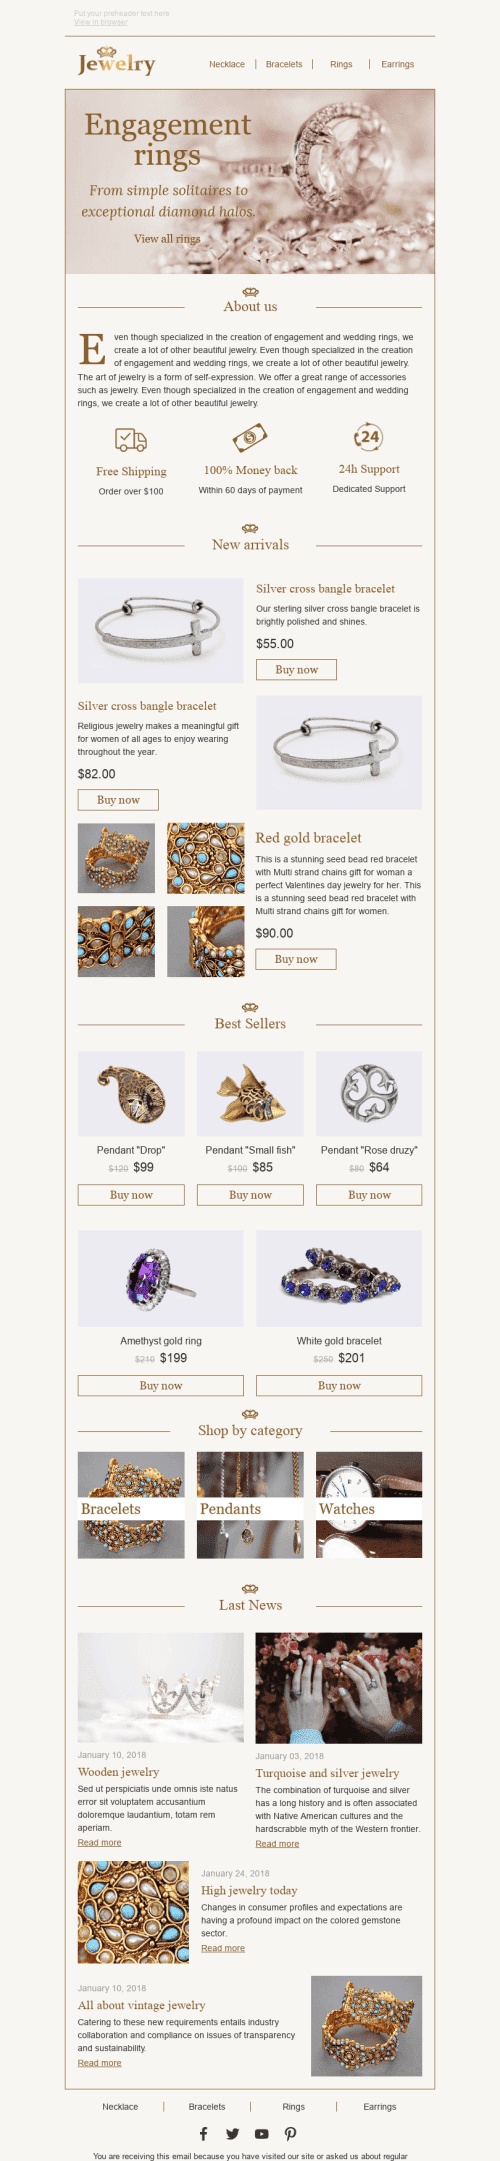 Promo Email Template "Red Gold" for Jewelry industry mobile view